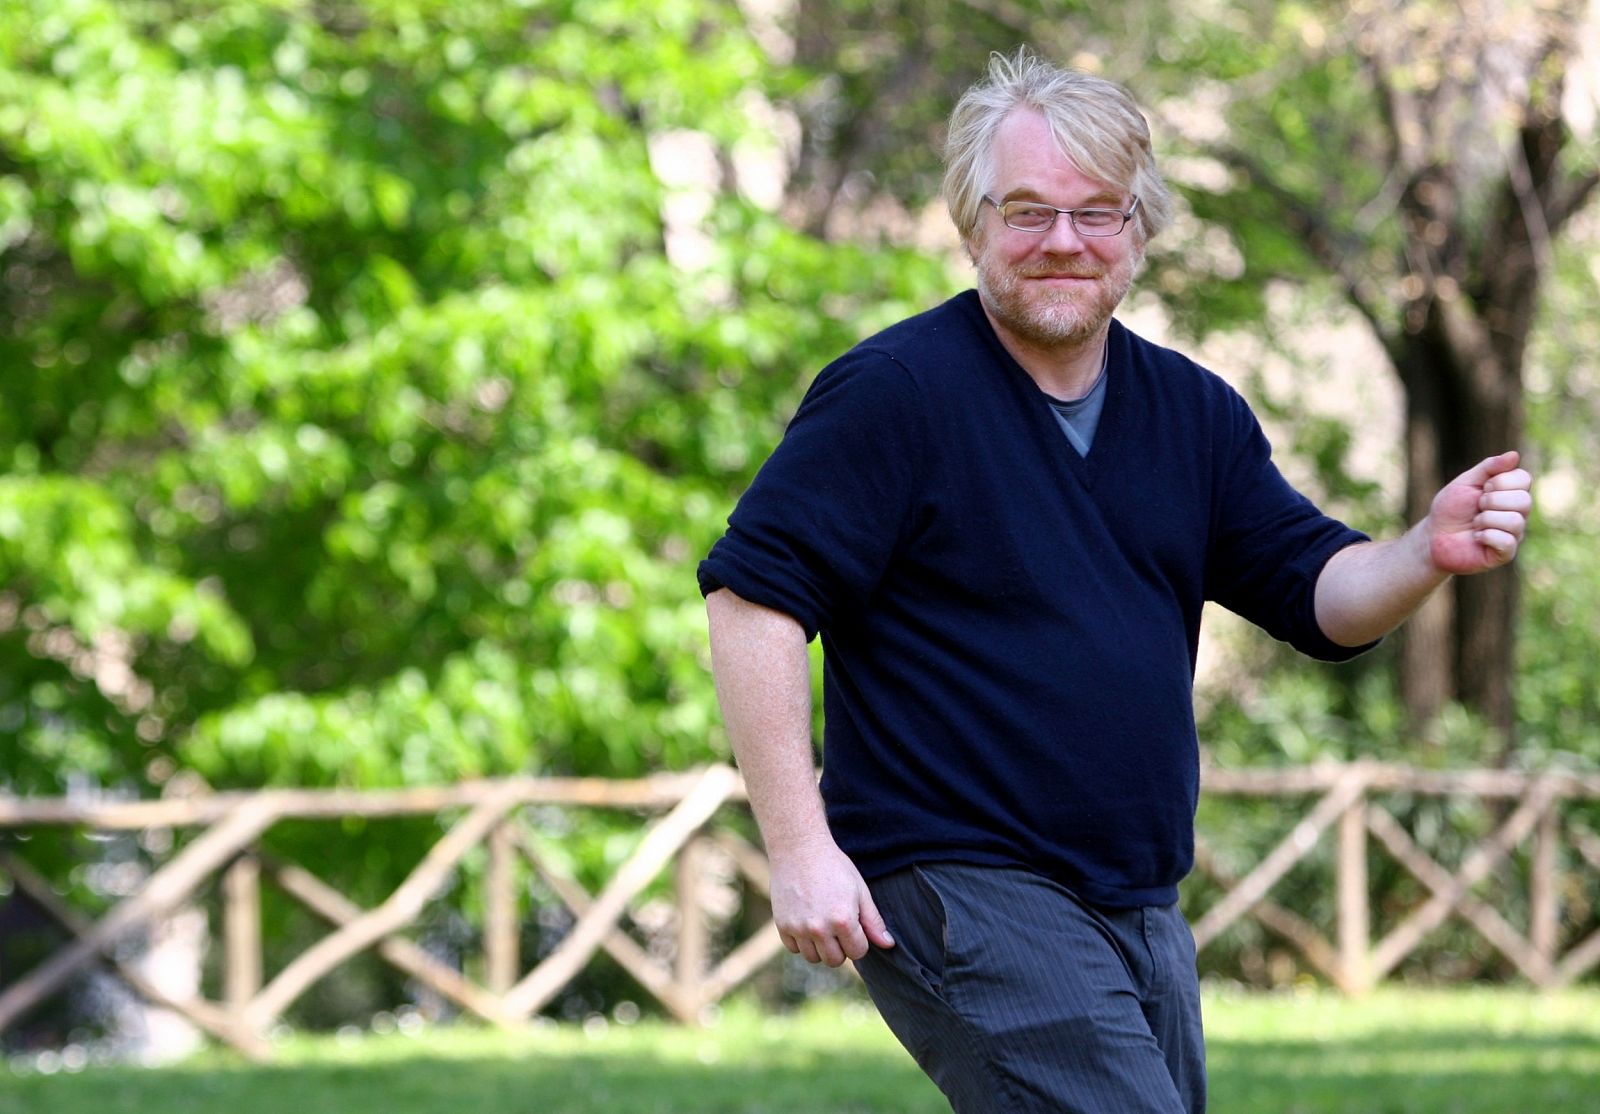 File photo of Hoffman smiling during a photo call in Rome